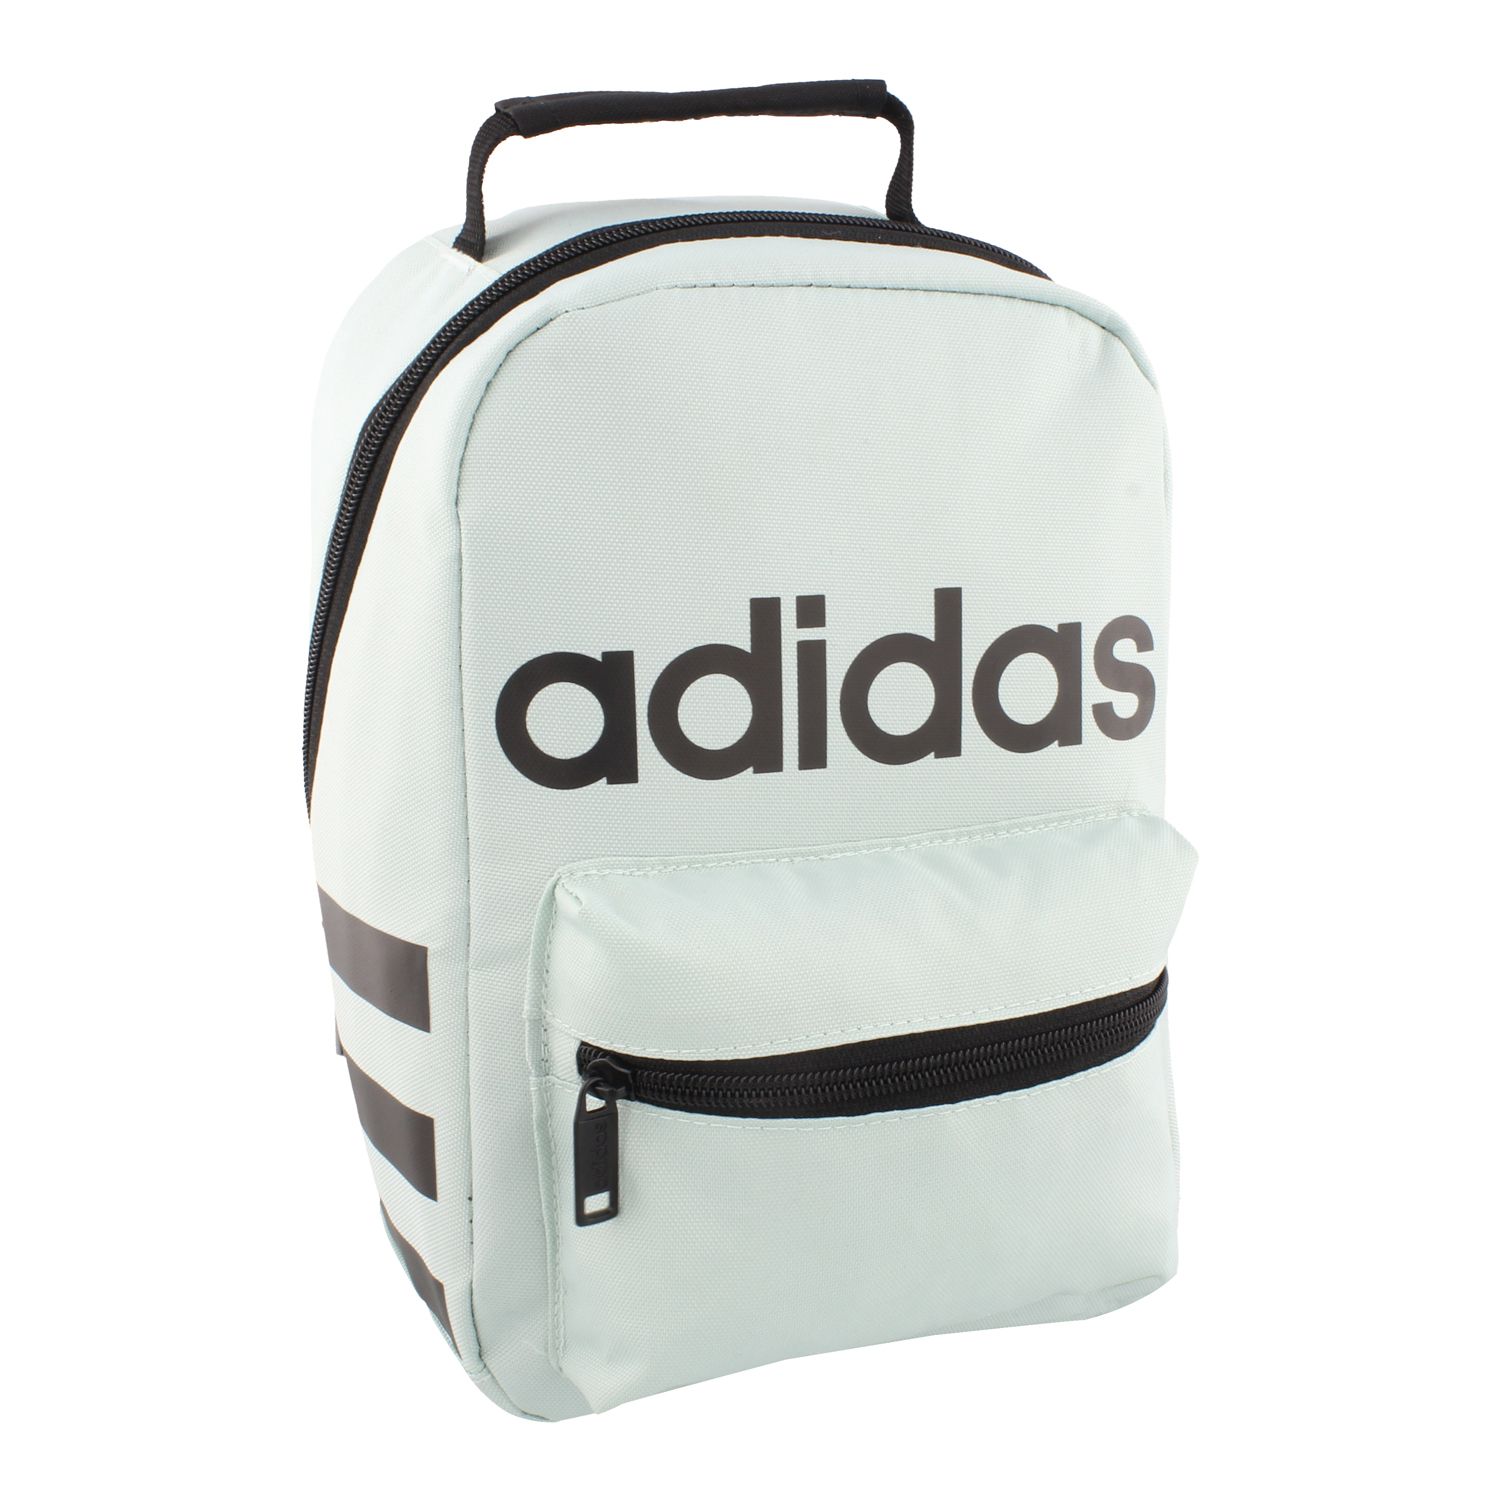 adidas lunch backpack